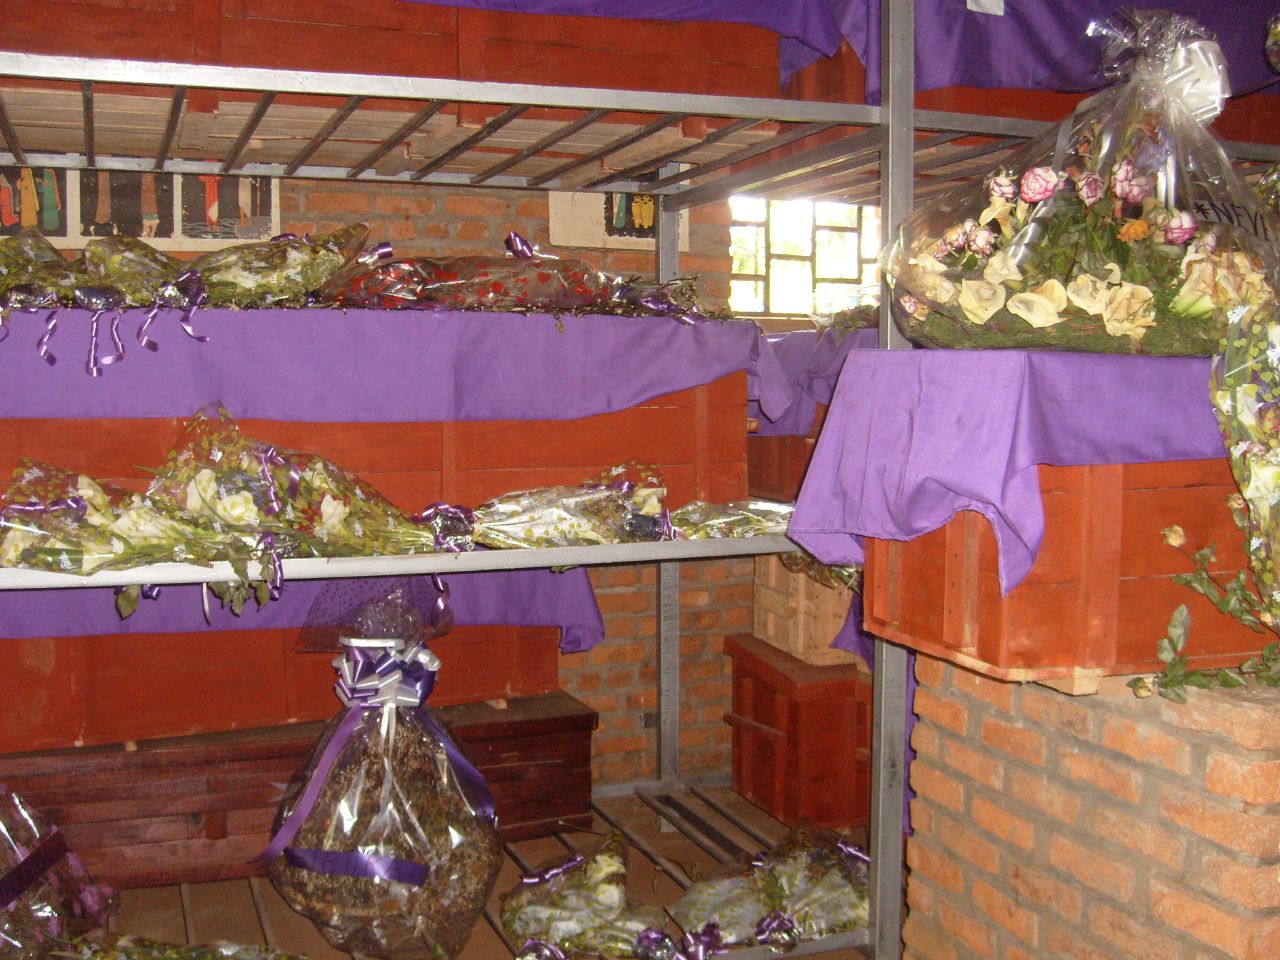 the purple and purple table cloths are next to the flowers